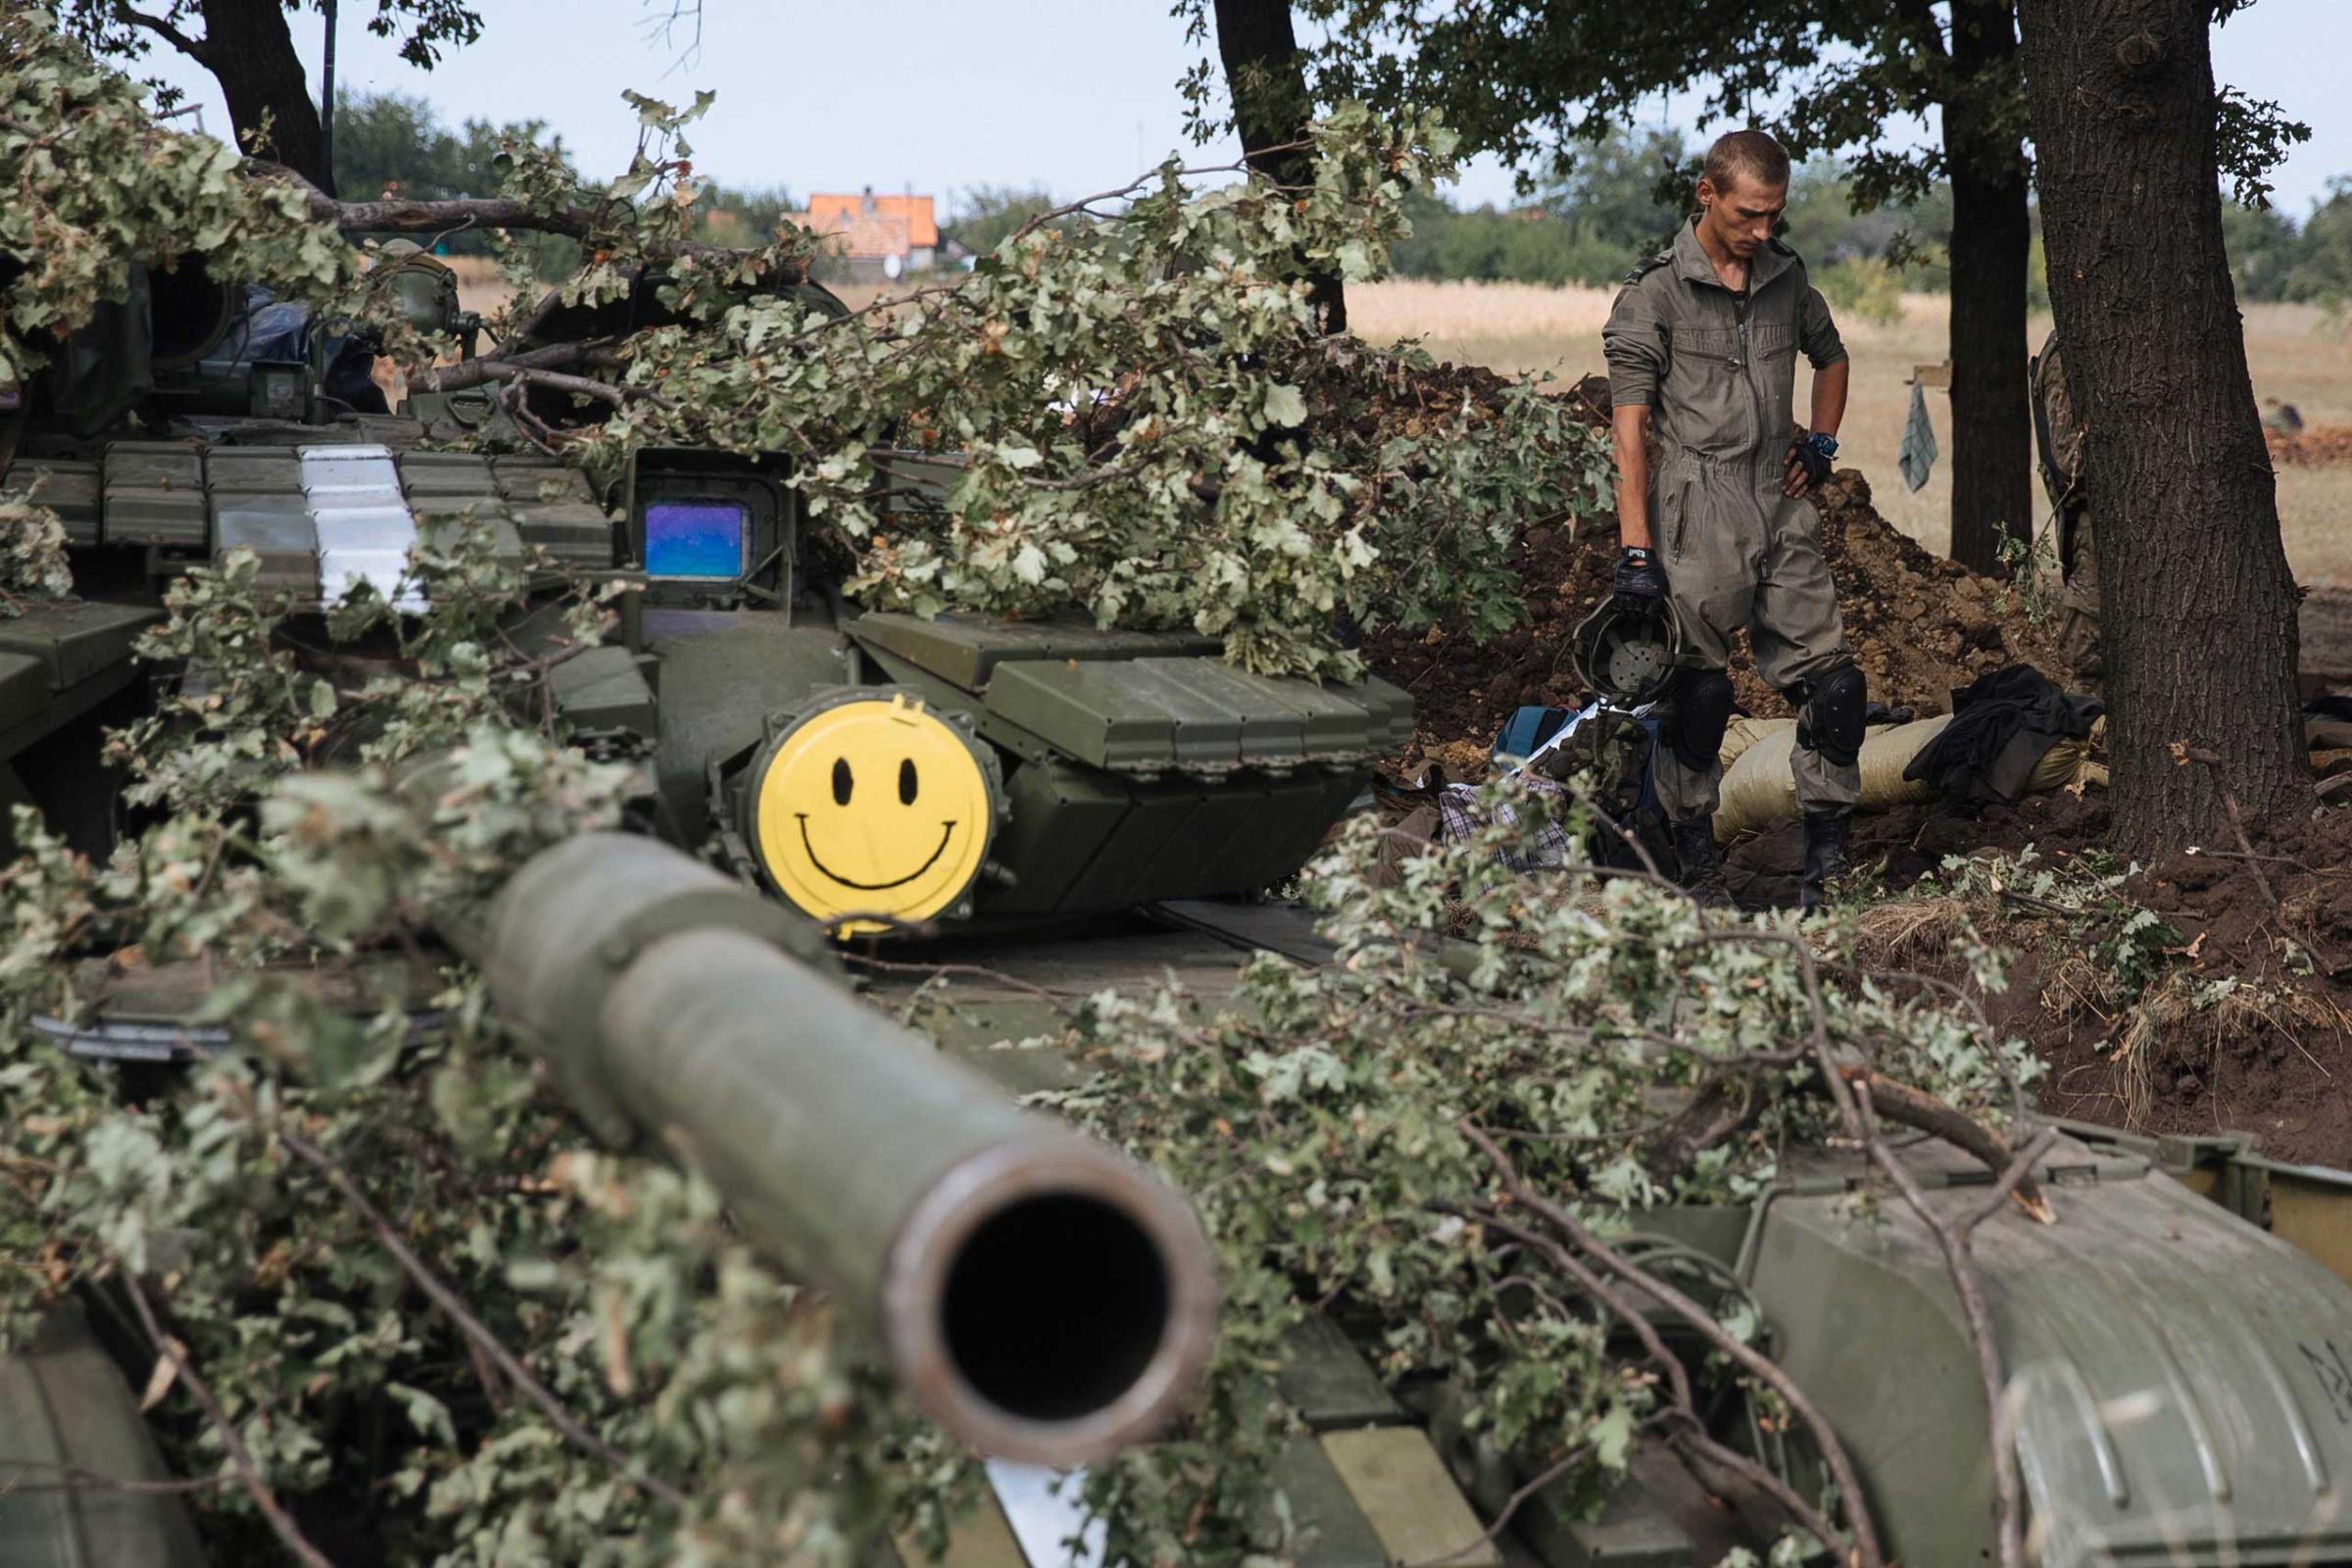 Ukrainian fighters partly wearing non-official uniforms stands next to a tank in a military camp based on a front line near Pervomaysk city of Lugansk region, Ukraine on Sept 12, 2014.